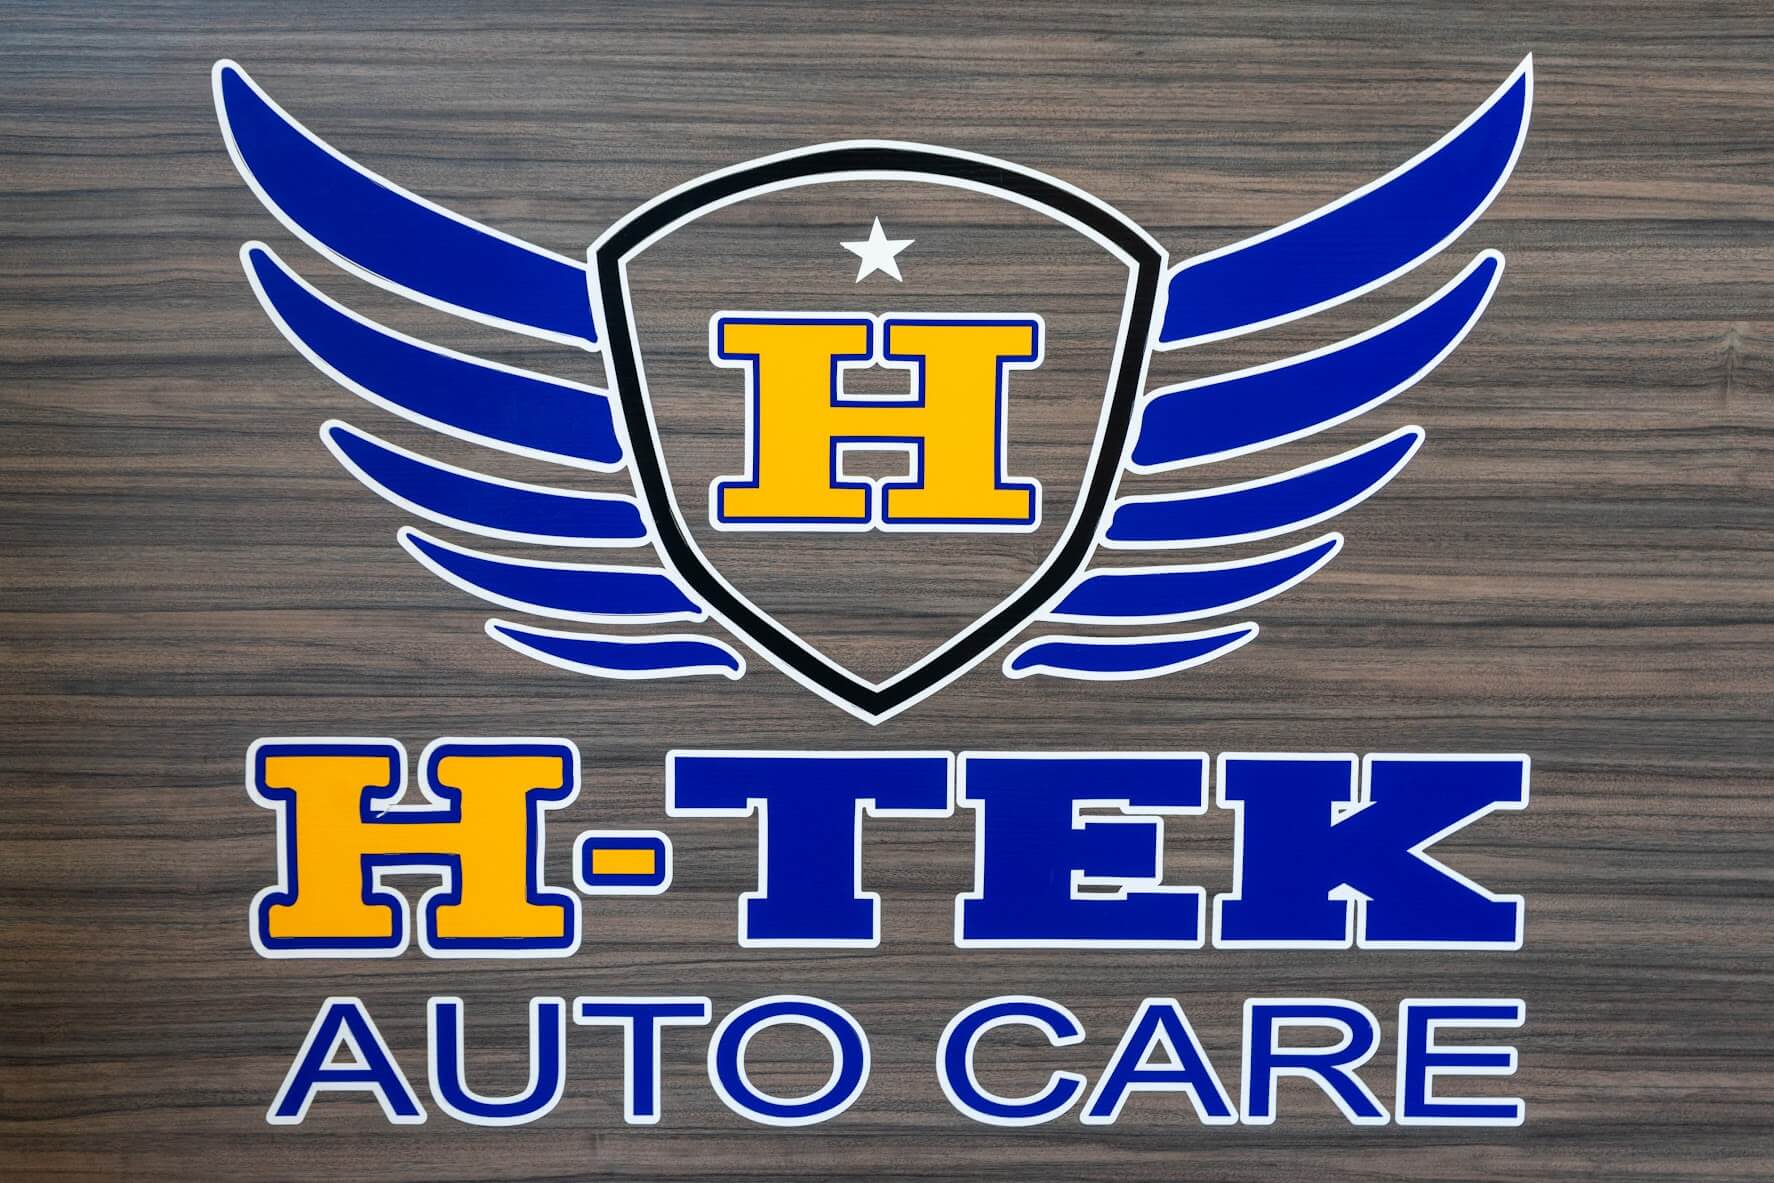 Trusted Automotive Mechanic near Kingsport, Tennessee